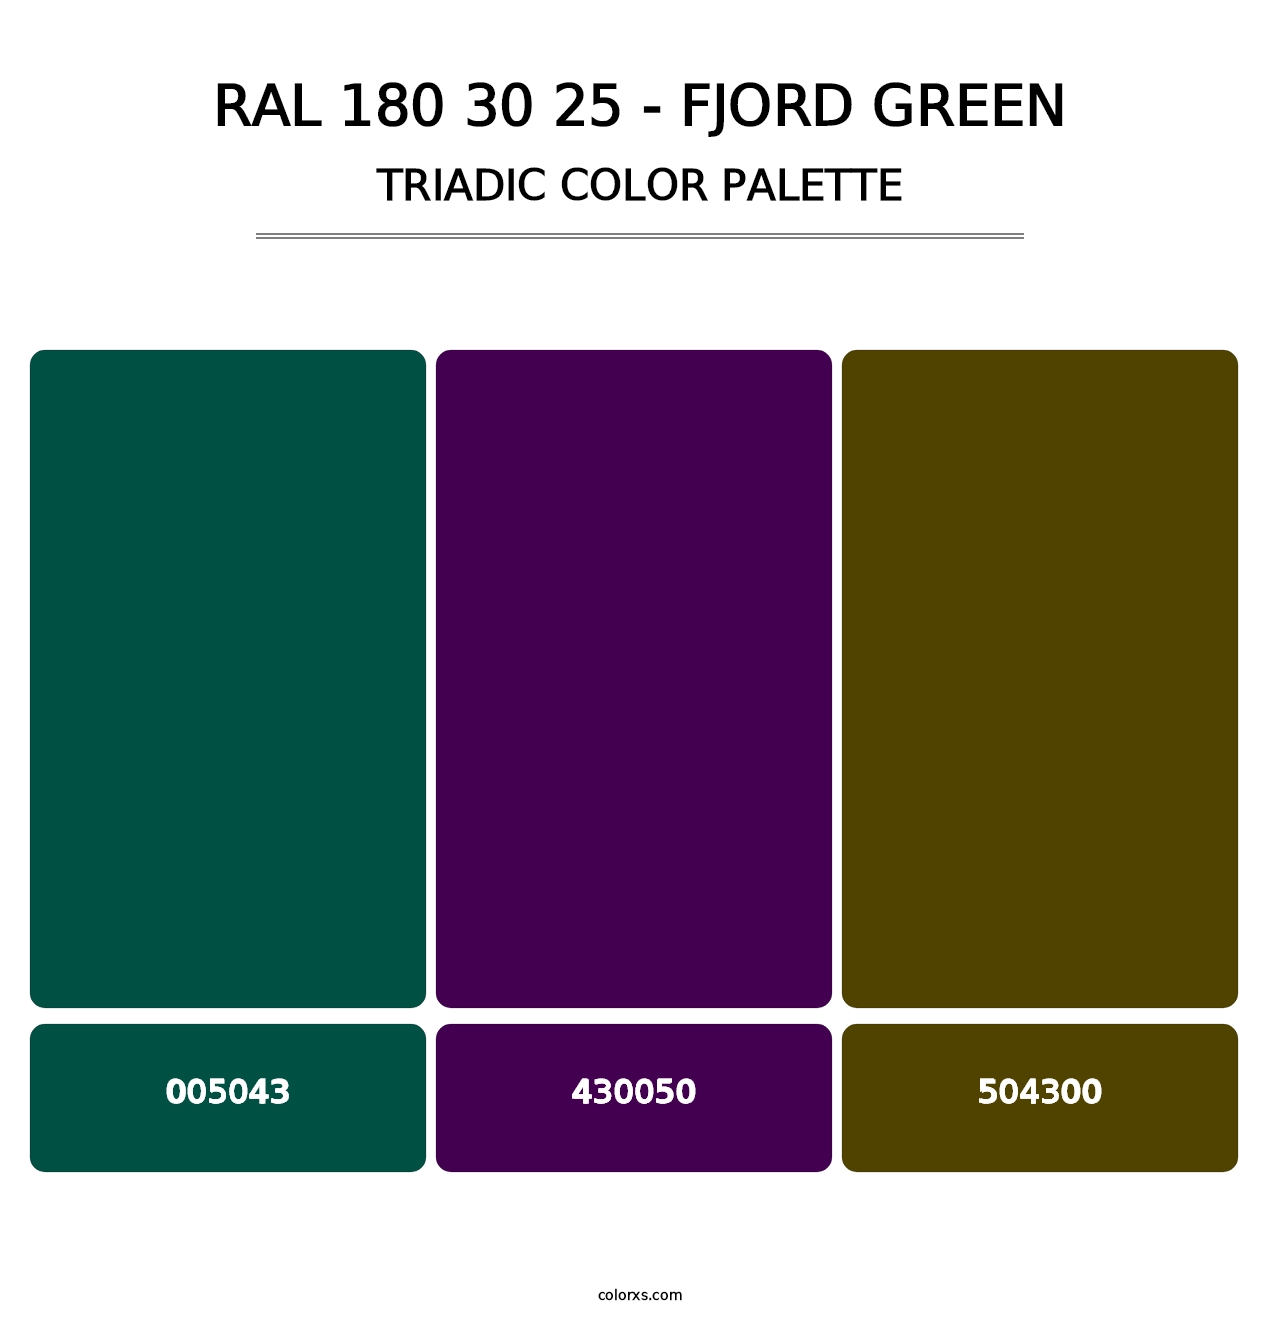 RAL 180 30 25 - Fjord Green - Triadic Color Palette